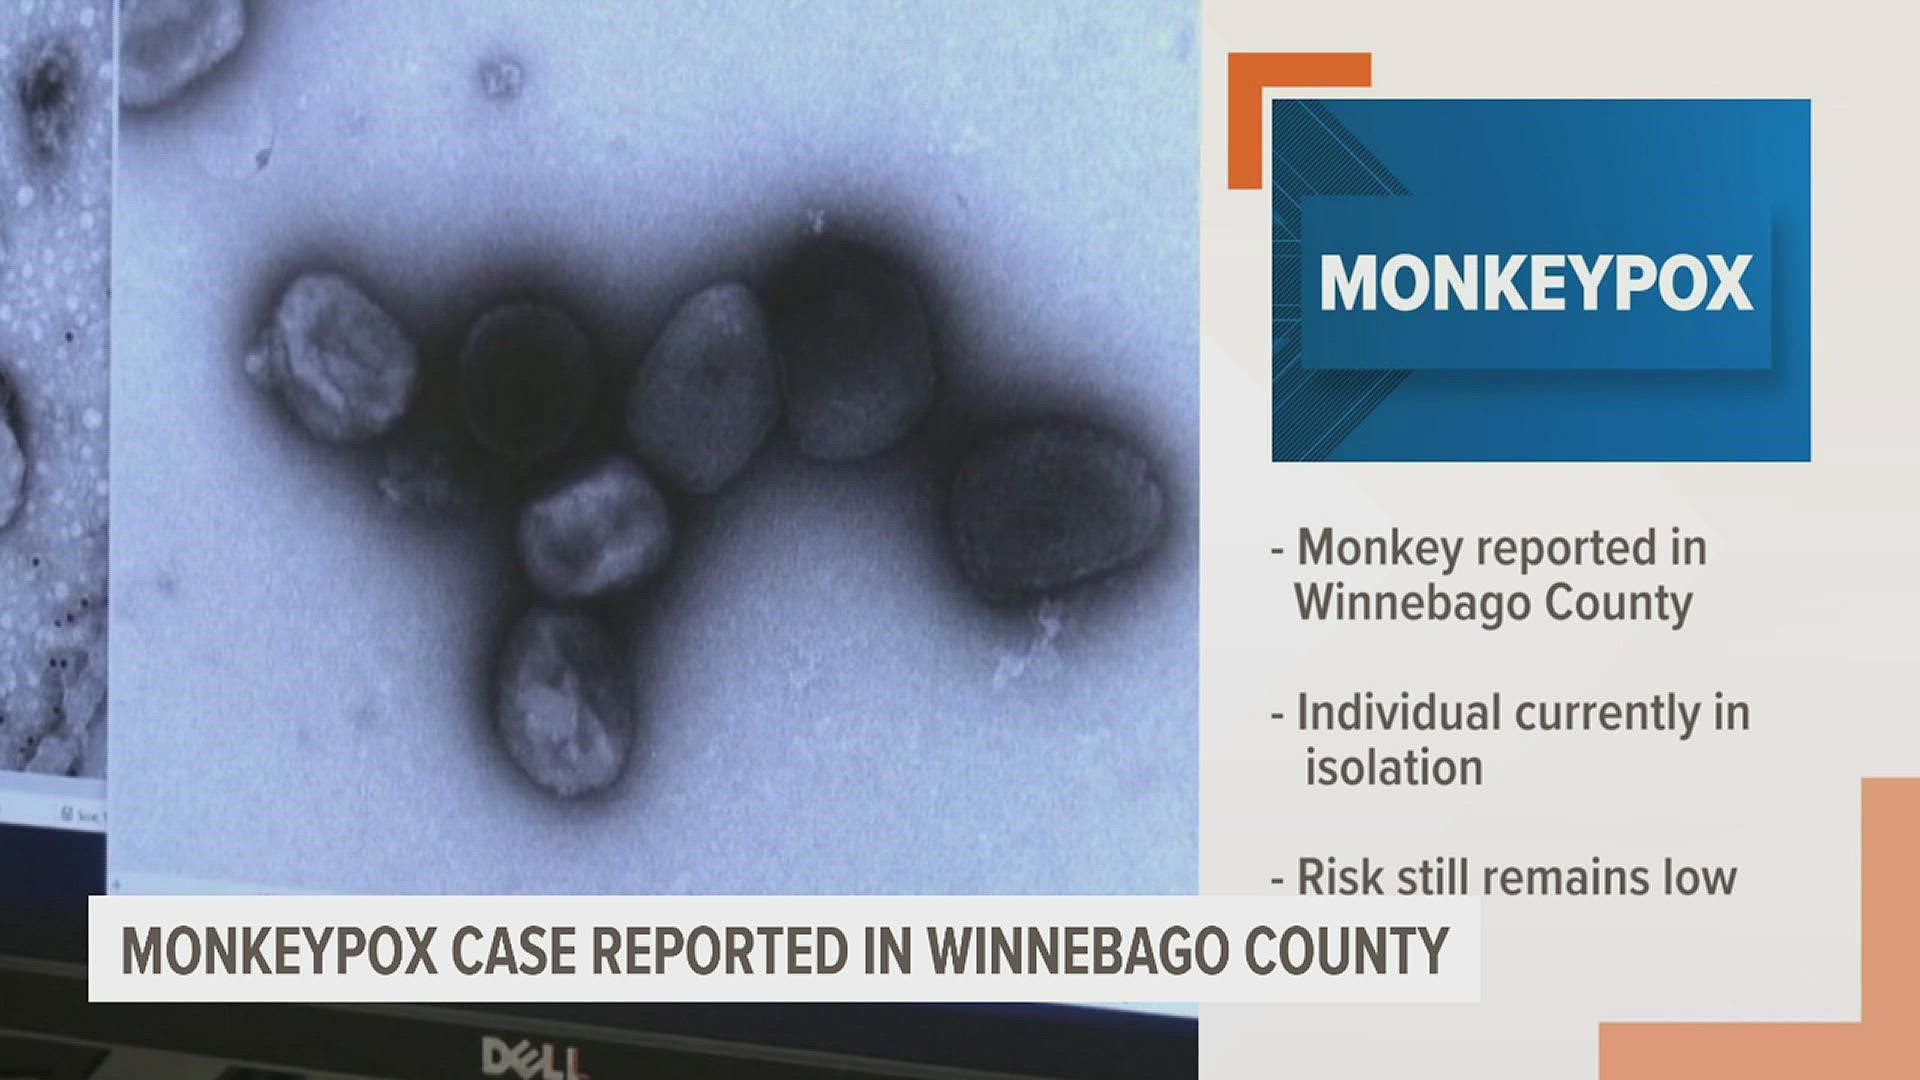 Although monkeypox was declared a global emergency, chances of infection remain pretty low in the U.S. Here's where the outbreak stands in Iowa and Illinois.